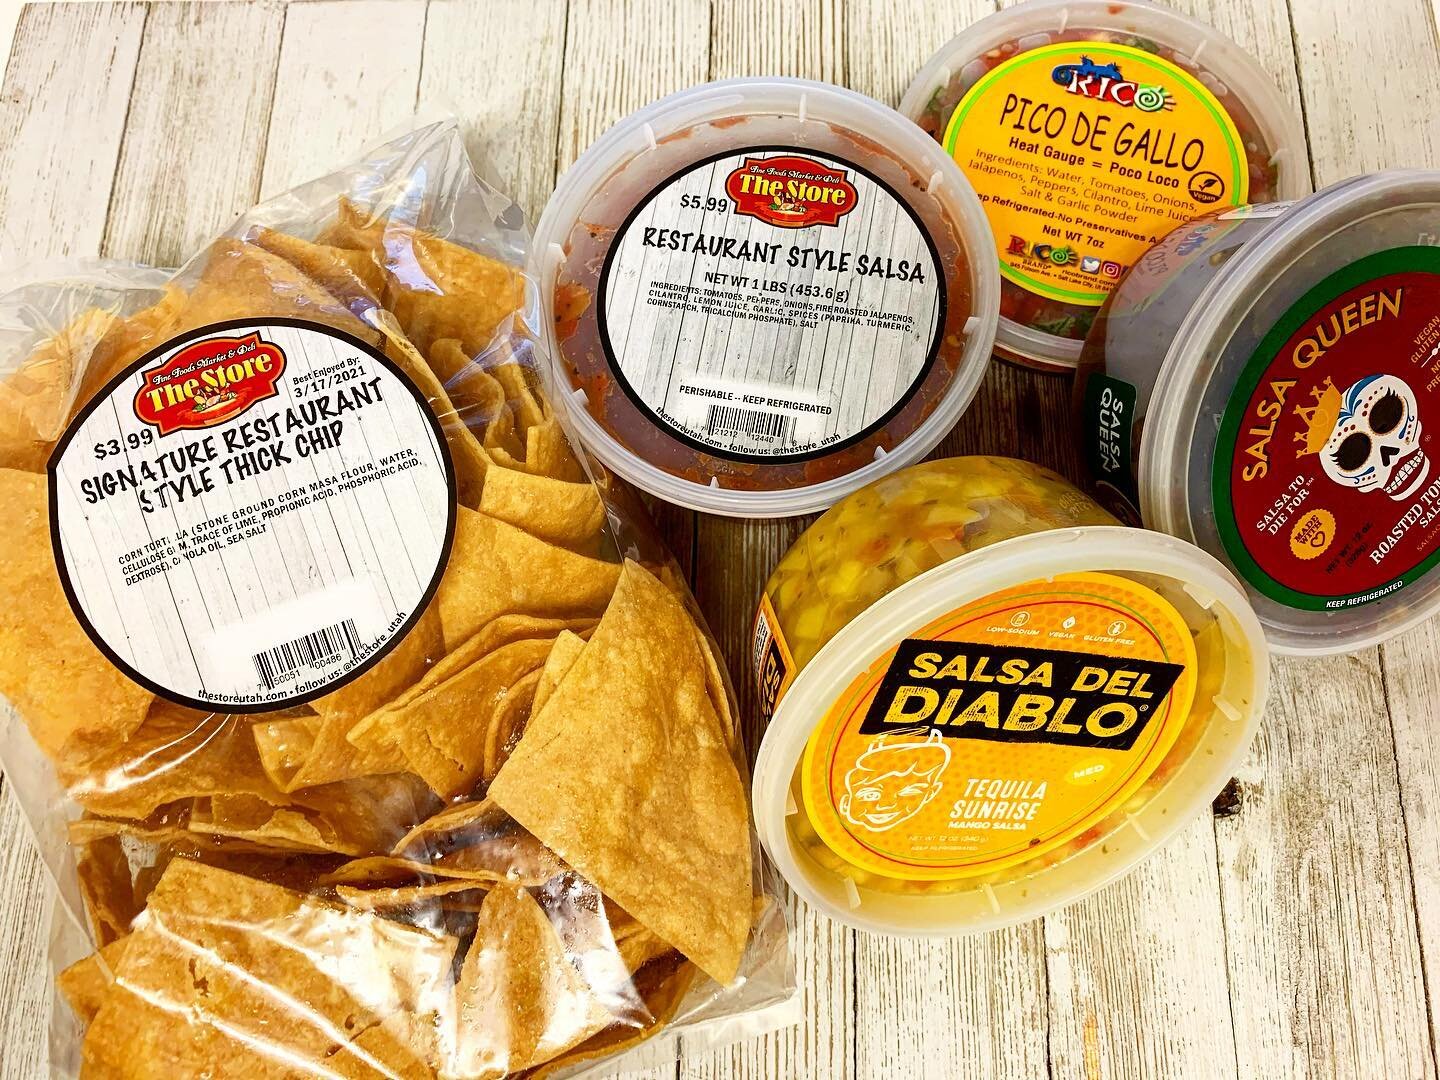 🎉IT&rsquo;S NATIONAL TORTILLA CHIP DAY! 🎉
_
Come by the Holladay store today and get your favorite chips and freshly made salsa! 
_
PART OF OUR VIP TEXTING PROGRAM? Get great deals on days like today!
_
Text &ldquo;THESTORE&rdquo; OR text &ldquo;GA